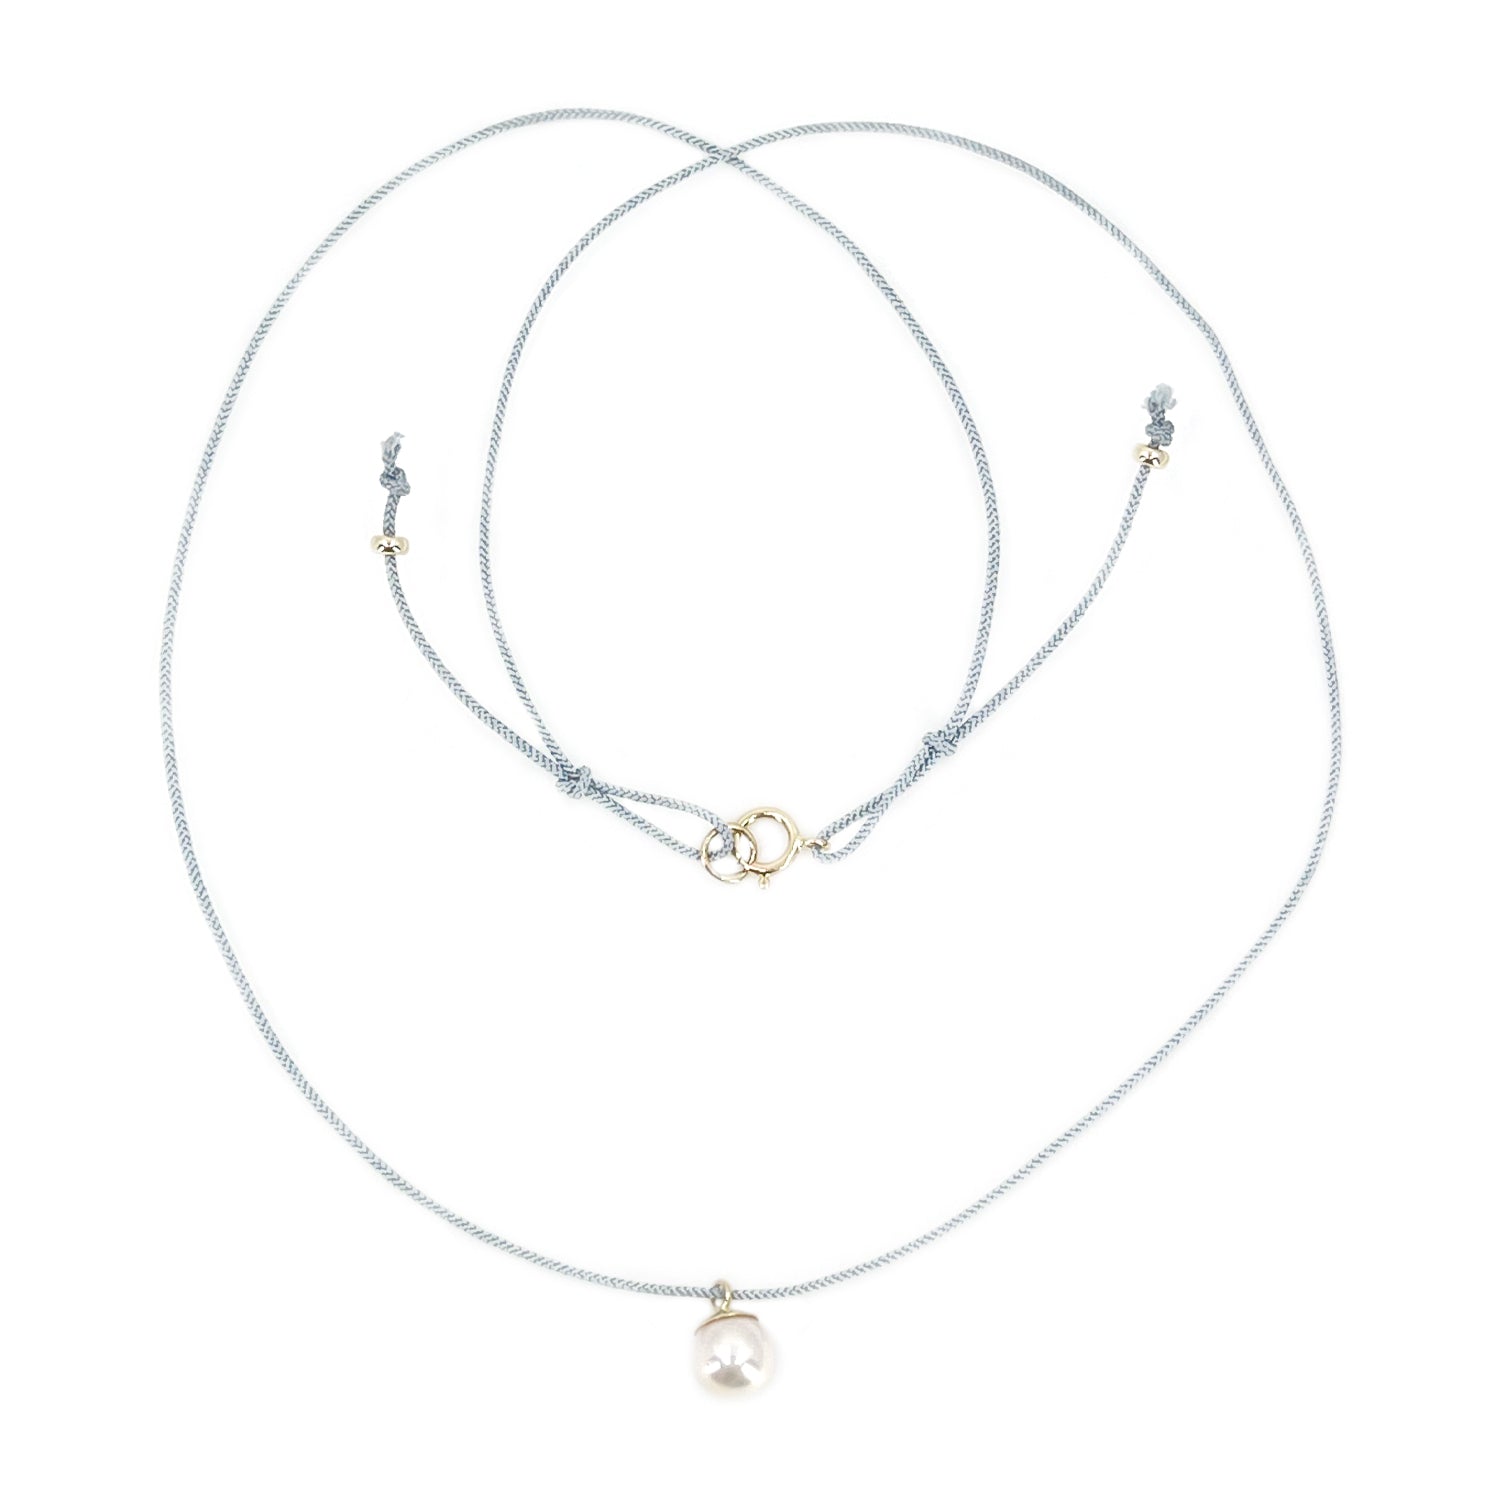 Kumihimo Braided Light Blue Silk Vintage Akoya Saltwater Cultured Pearl Adjustable Necklace-14K Yellow Gold